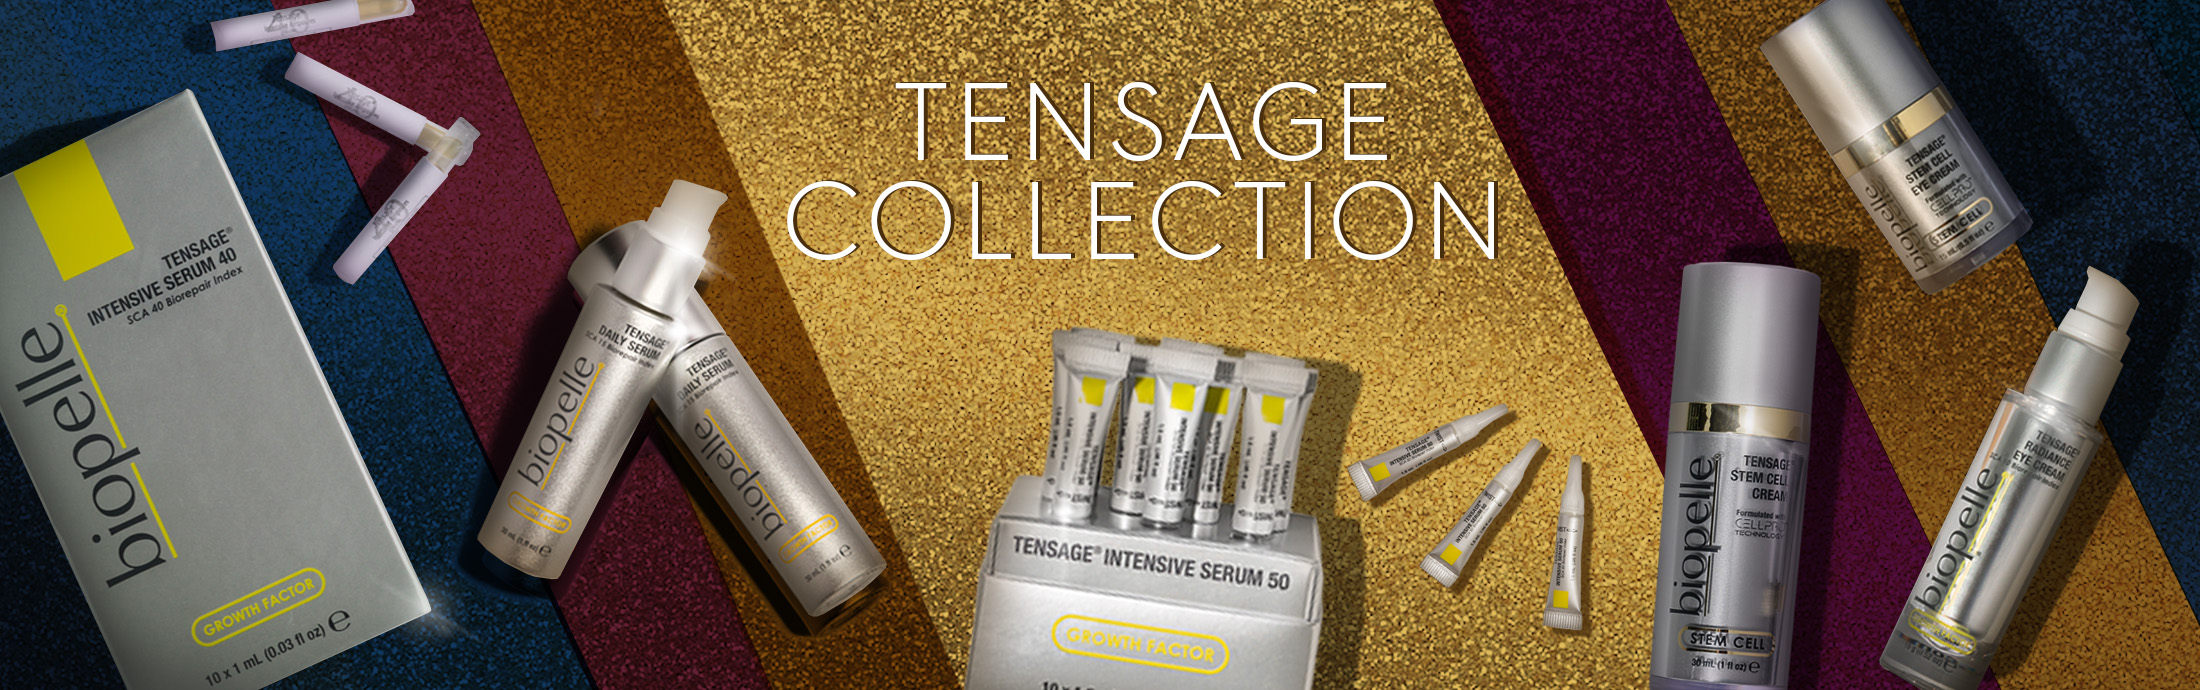 Tensage Collection